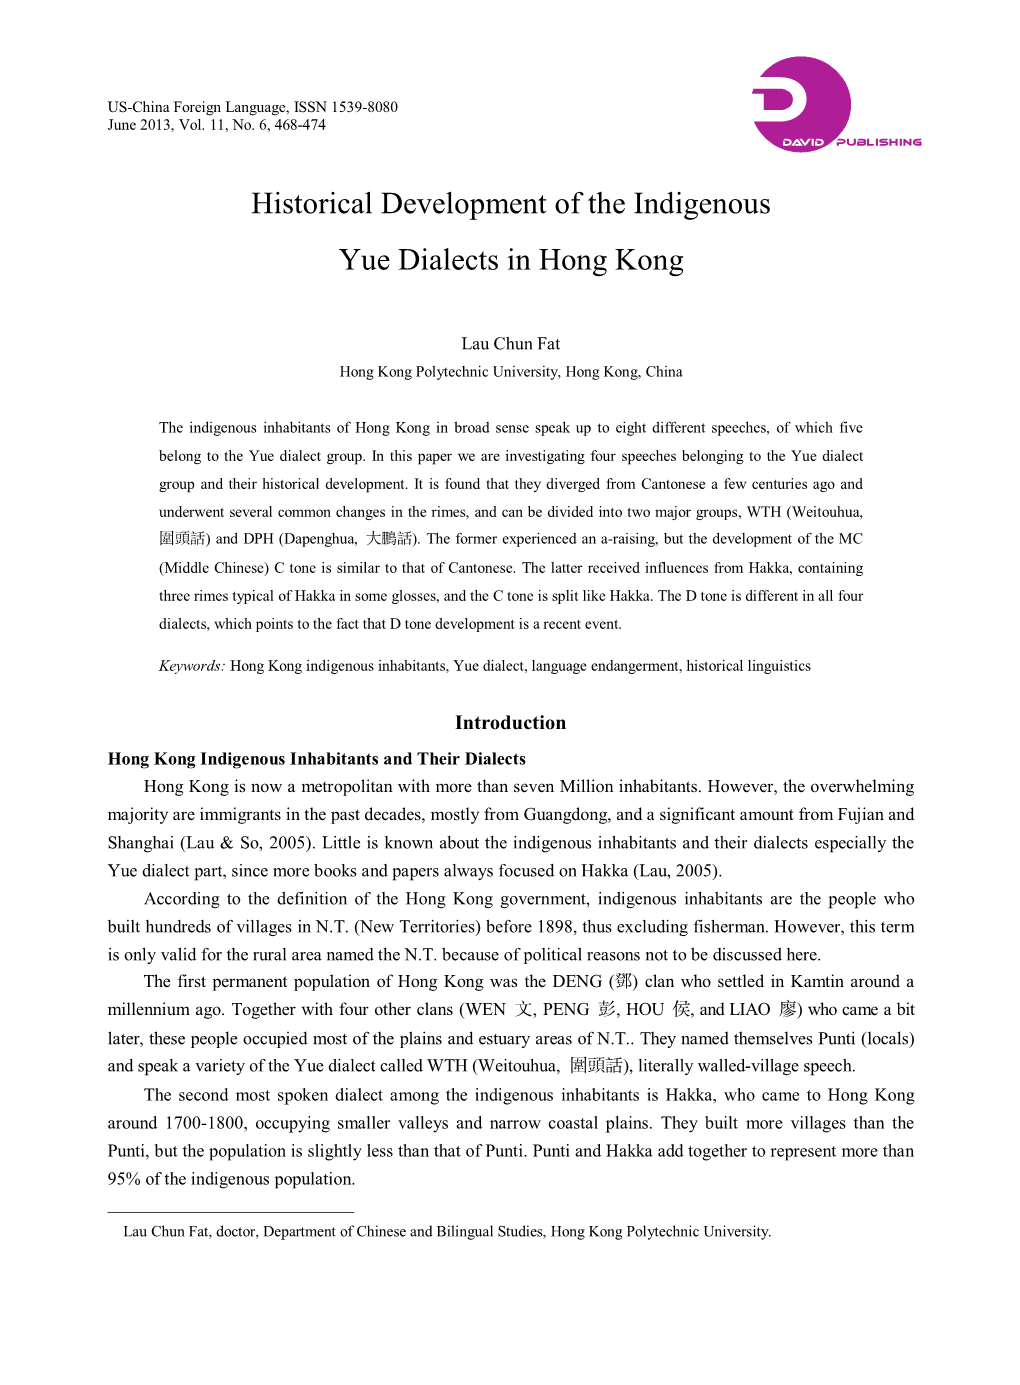 Historical Development of the Indigenous Yue Dialects in Hong Kong